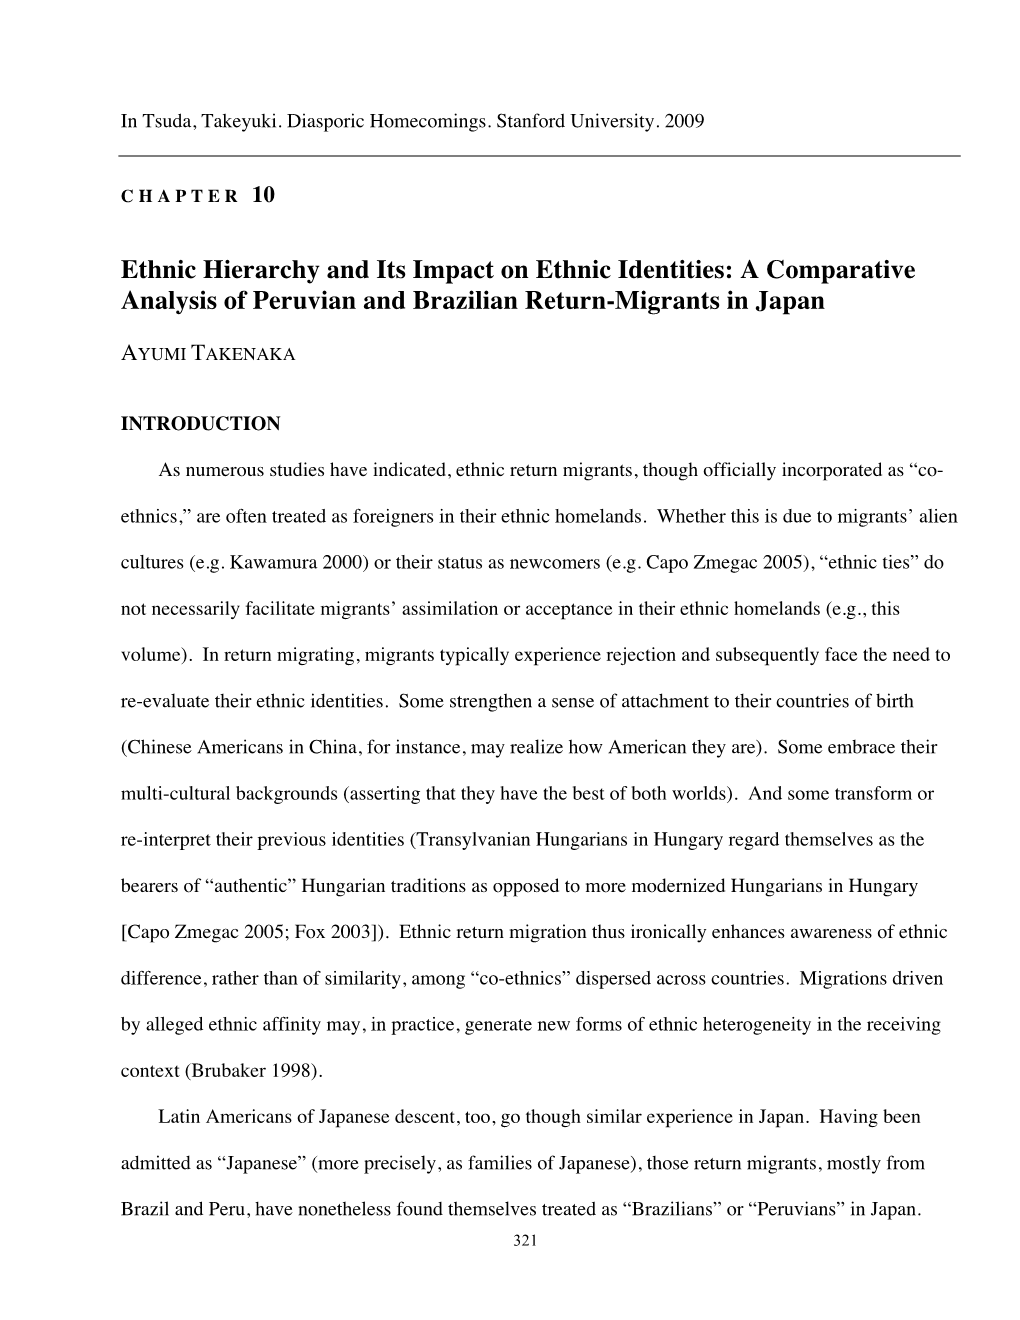 Ethnic Hierarchy and Its Impact on Ethnic Identities: a Comparative Analysis of Peruvian and Brazilian Return-Migrants in Japan